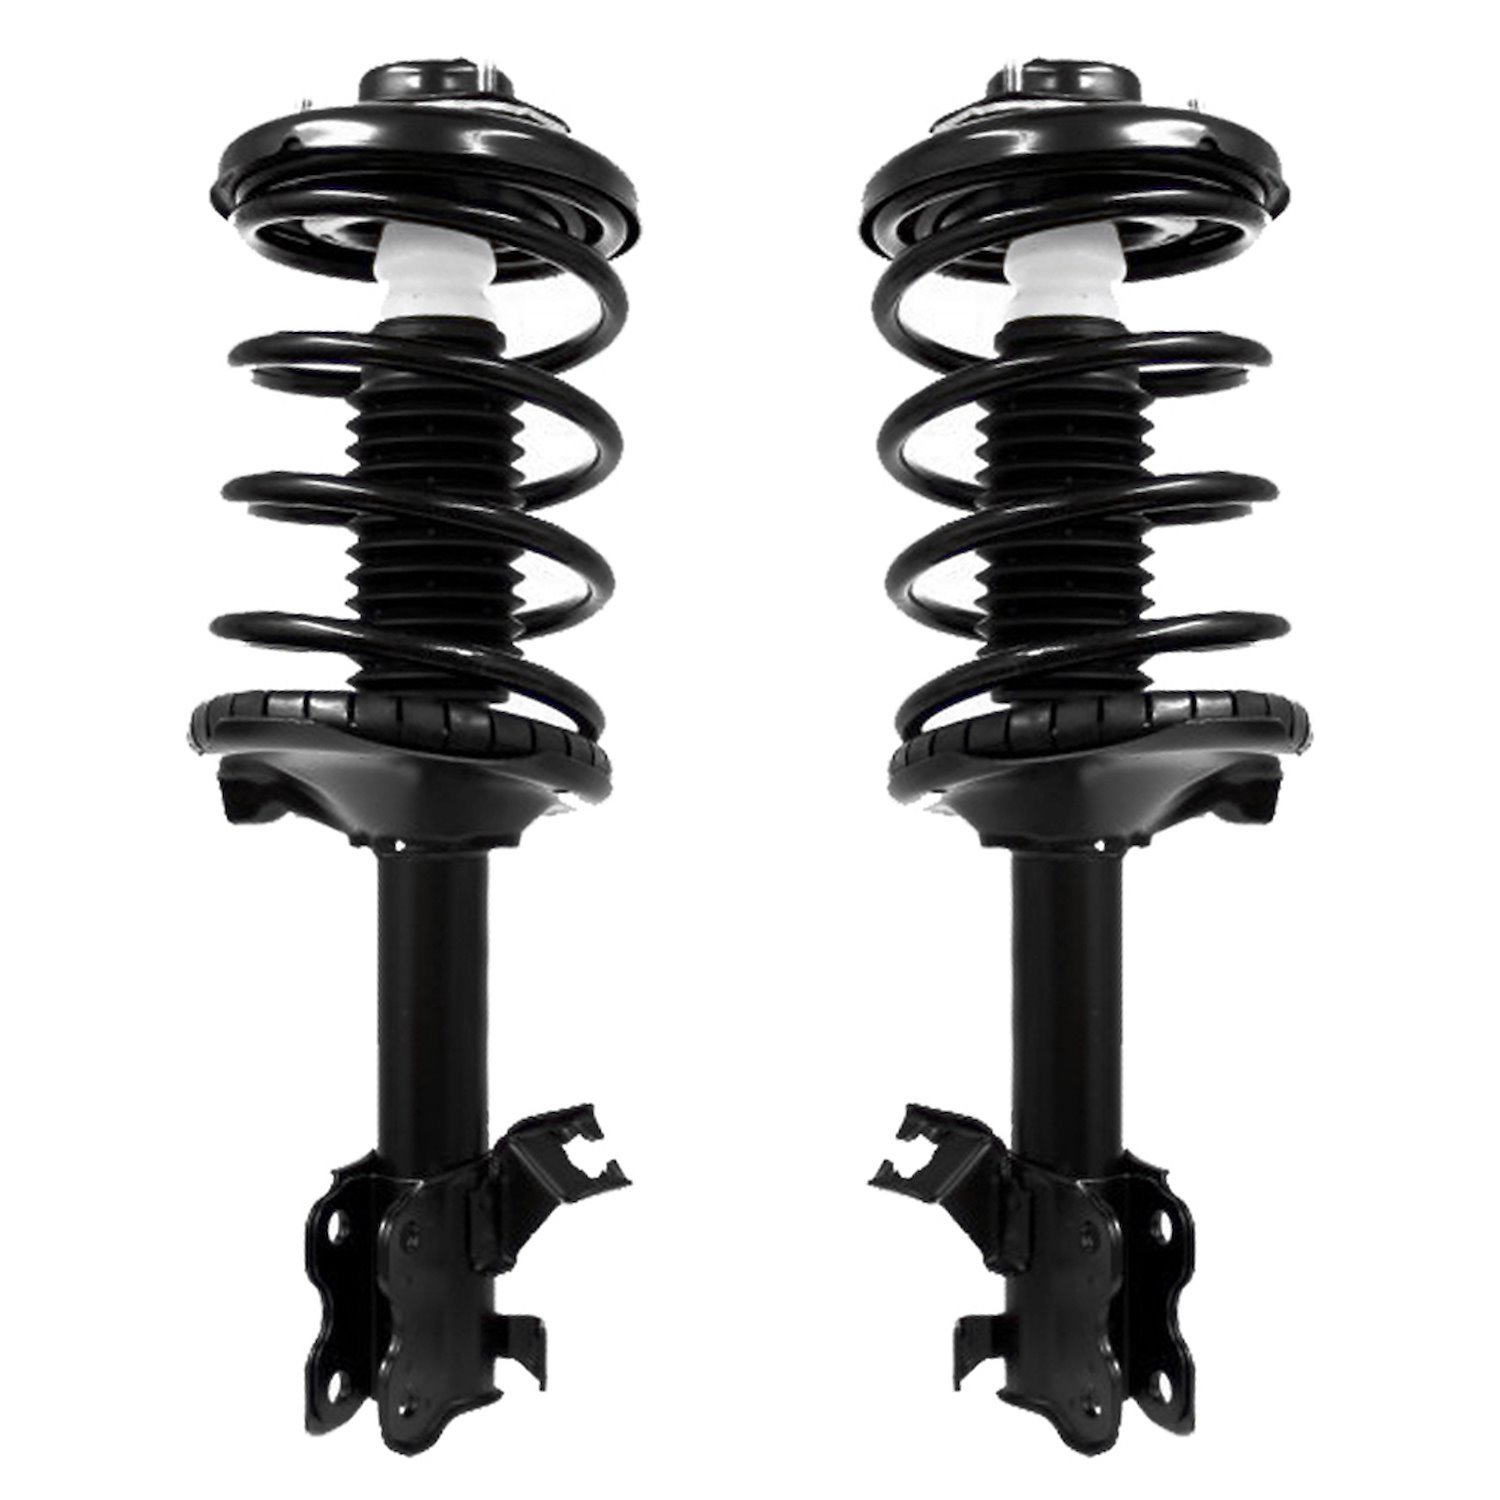 2-11941-11942-001 Suspension Strut & Coil Spring Assembly Set Fits Select Nissan Maxima, Infiniti I30